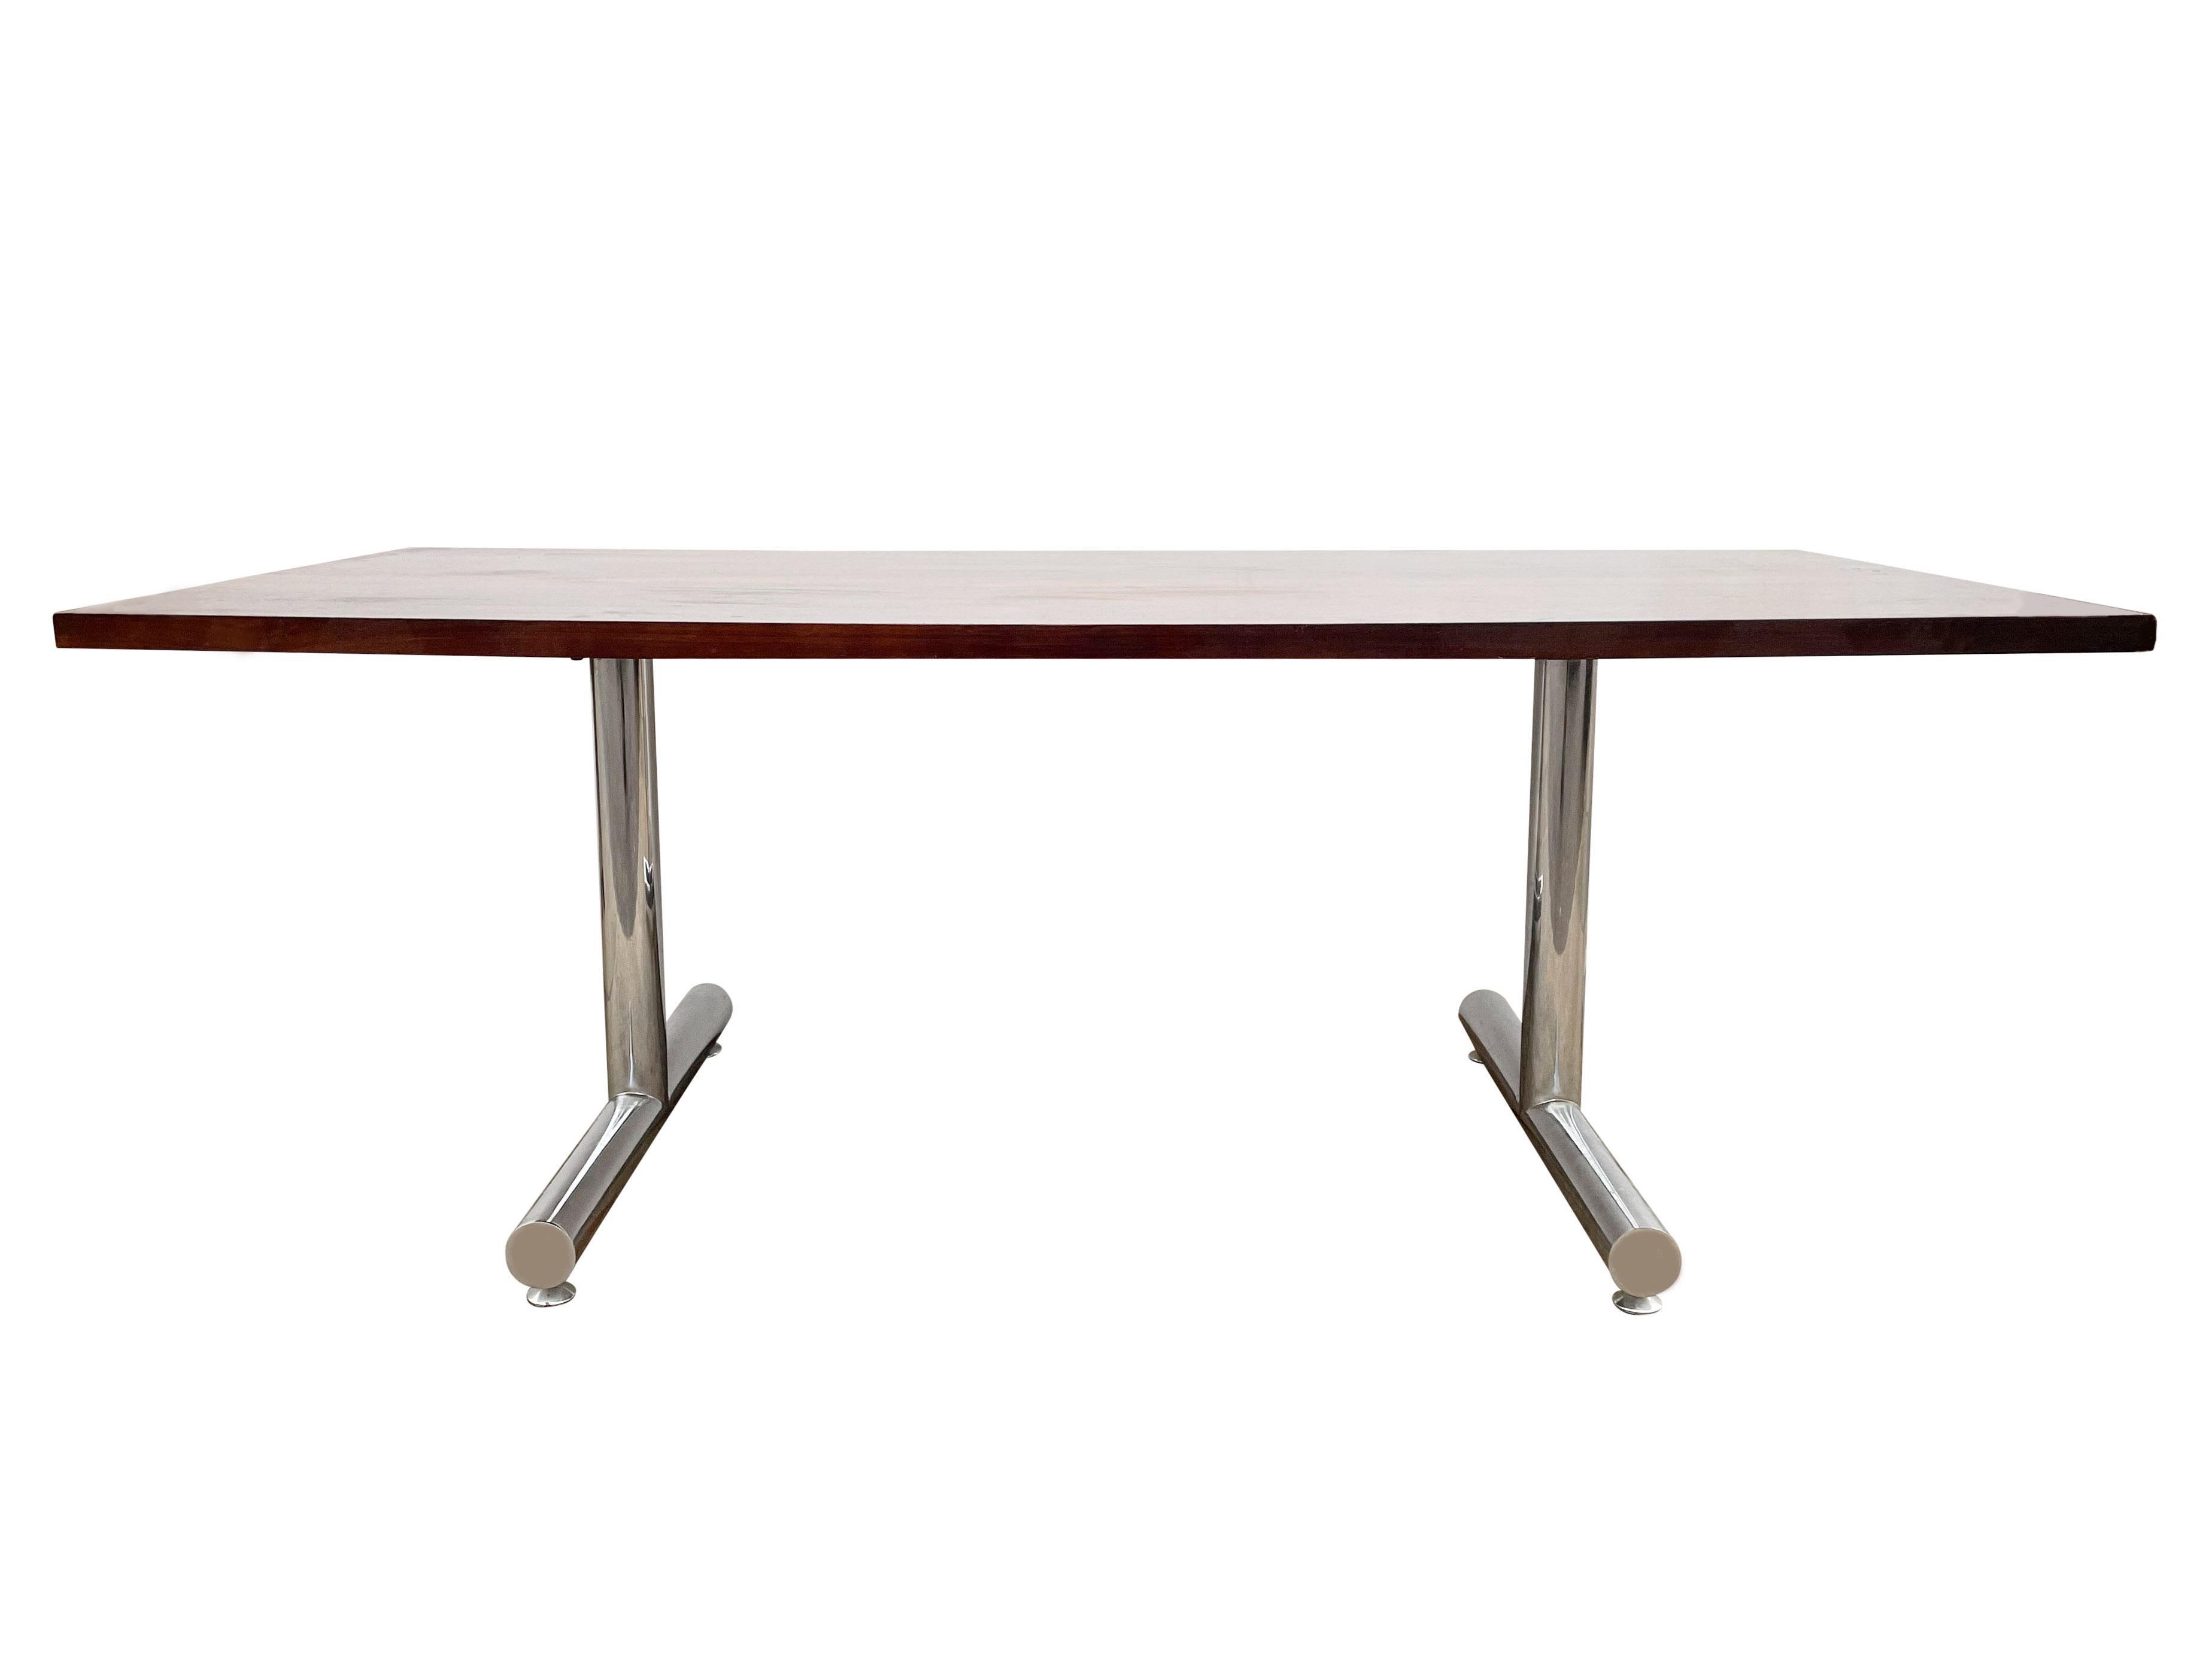 American Mid-Century Modern Rectangular Rosewood Dining Table or Conference Table